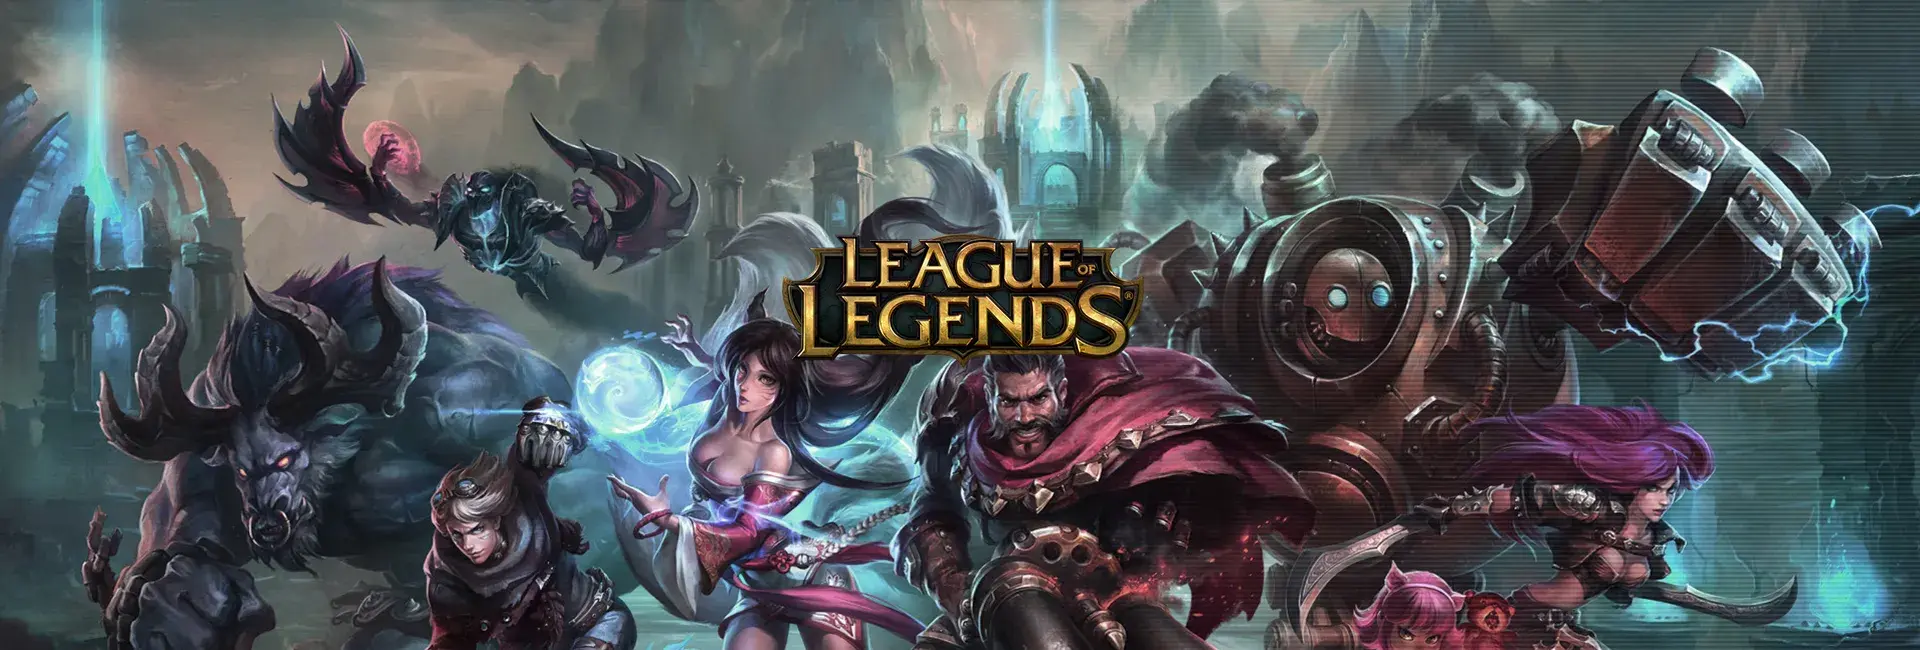 League of Legends $100 Gift Card - NA Server Only [Online Game Code]